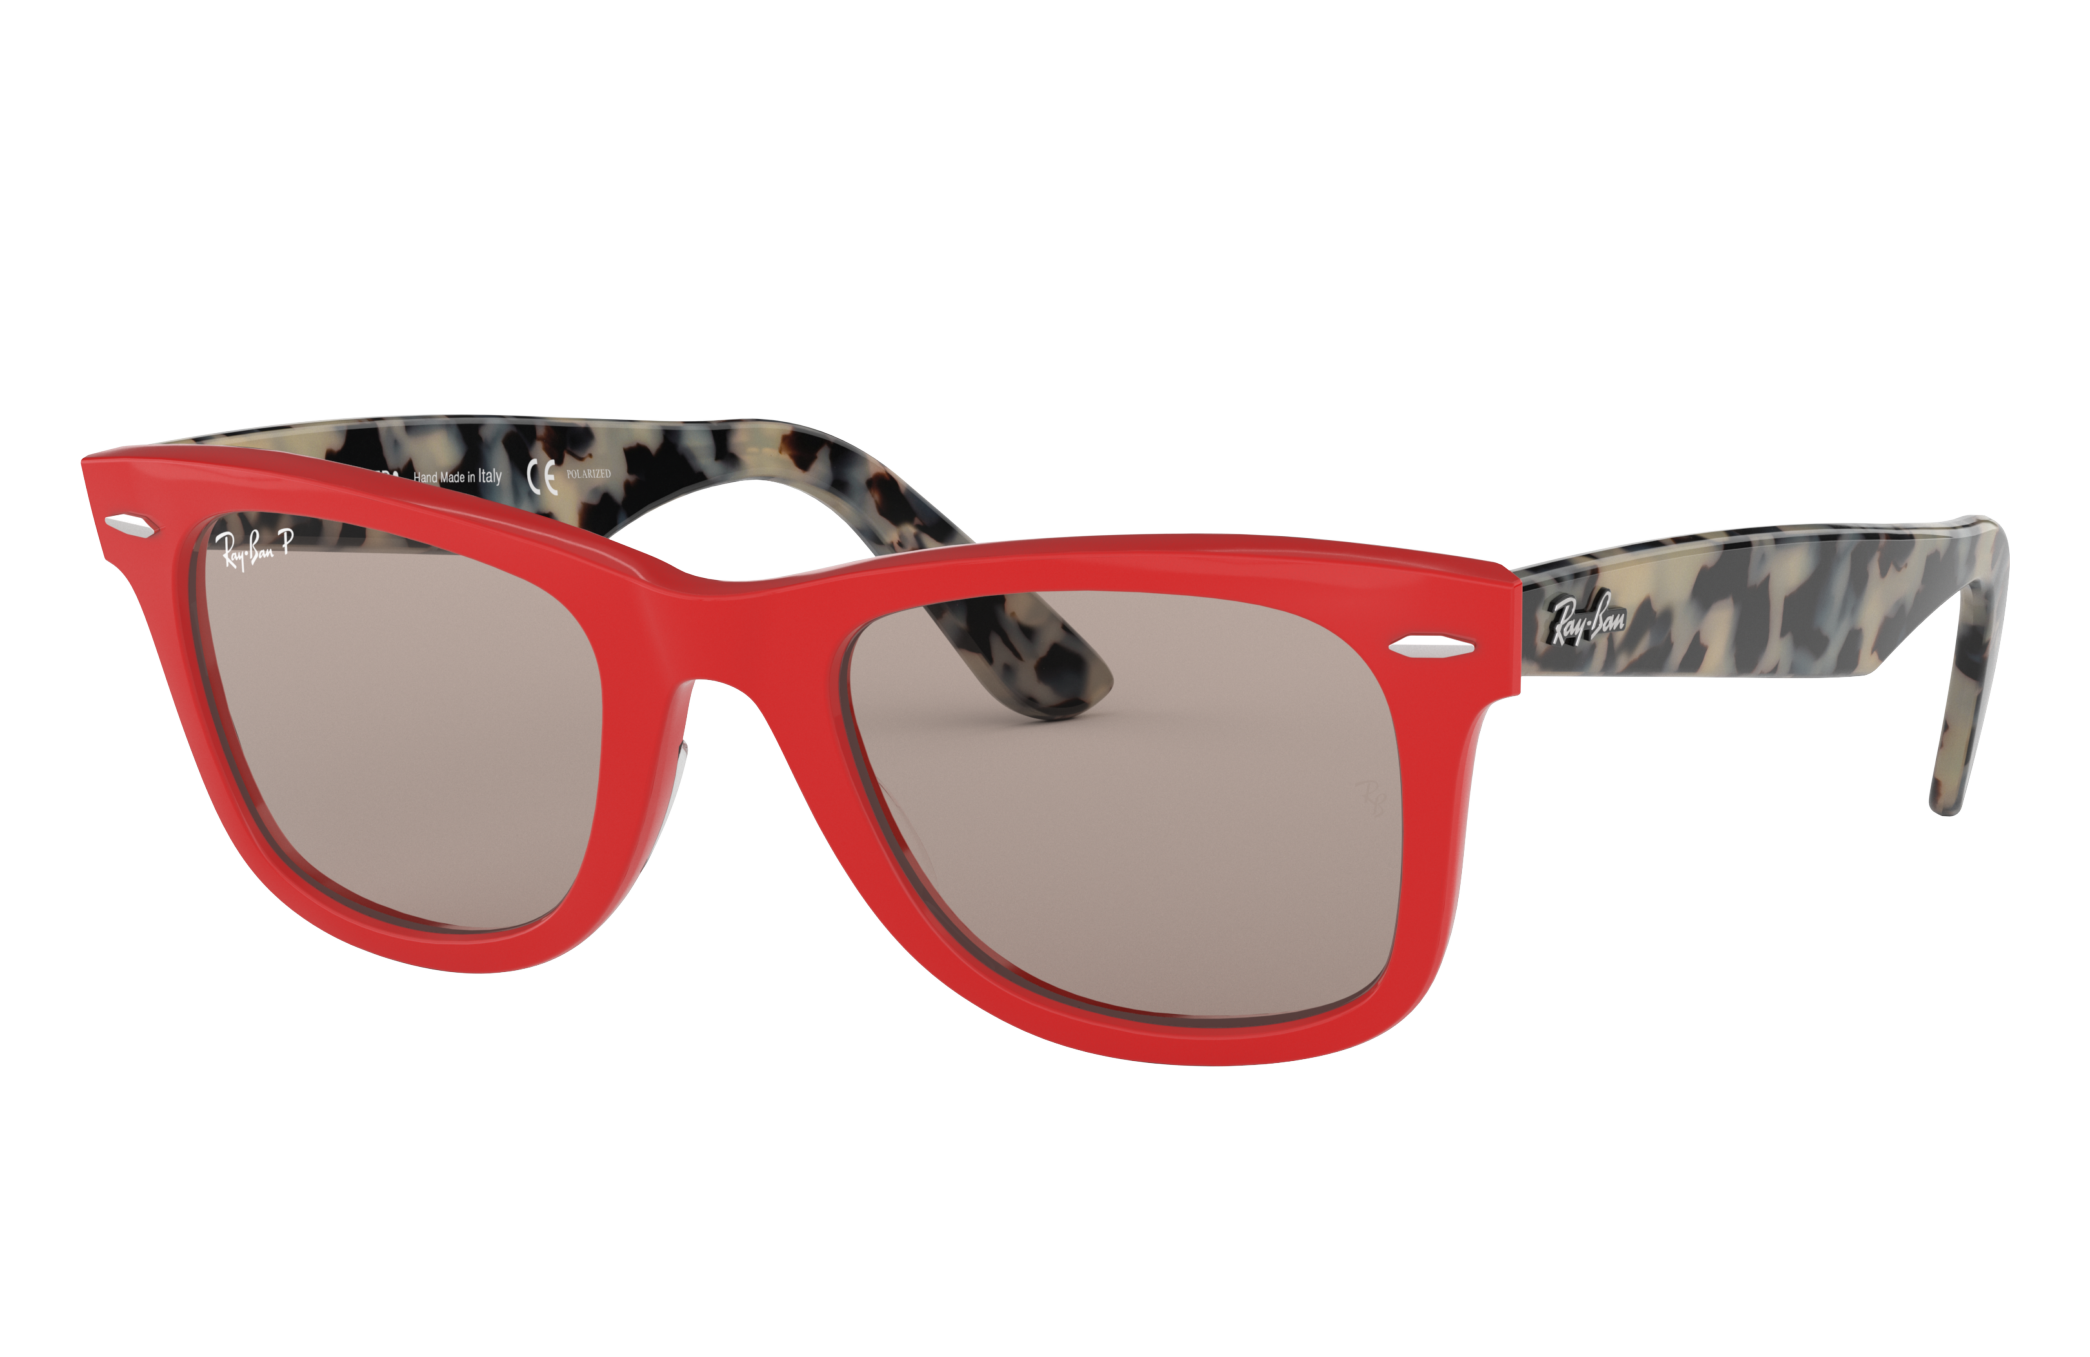 Wayfarer Pop Sunglasses in Red and Grey | Ray-Ban®